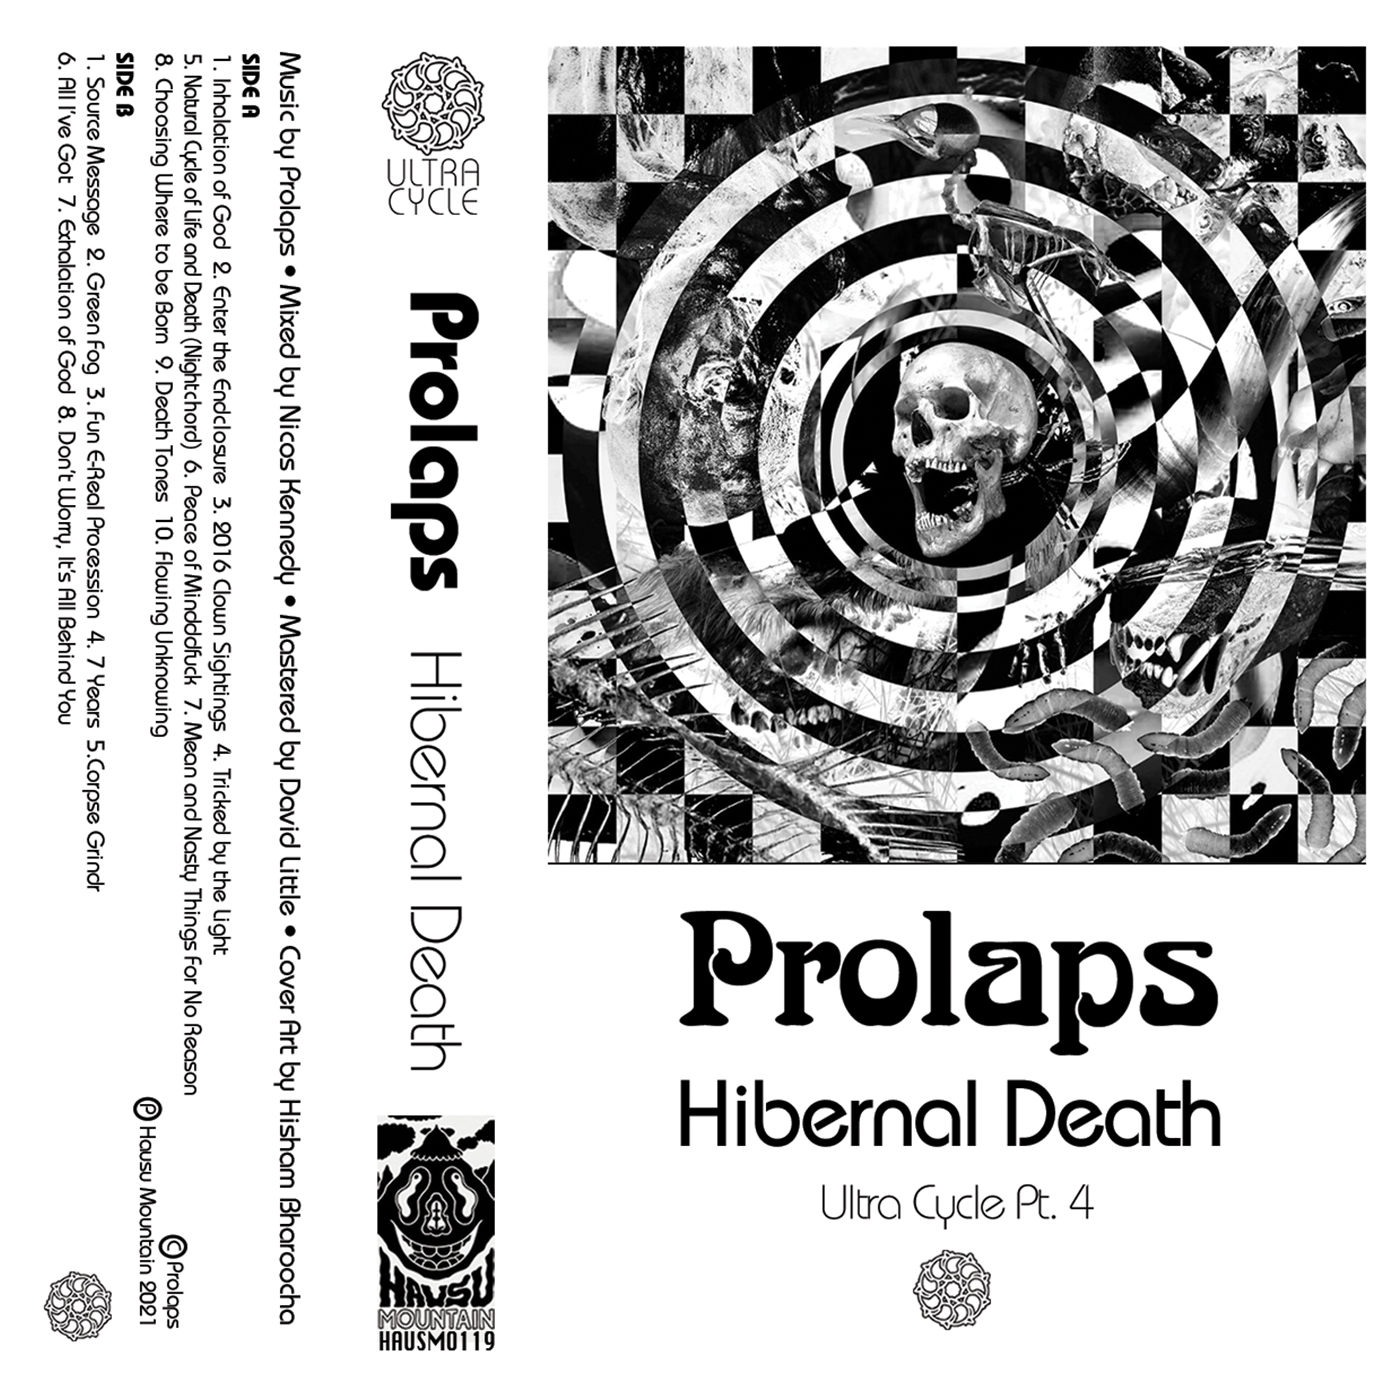 the cover art for the album 'Ultra Cycle Part 4: Hibernal Death' by Prolaps